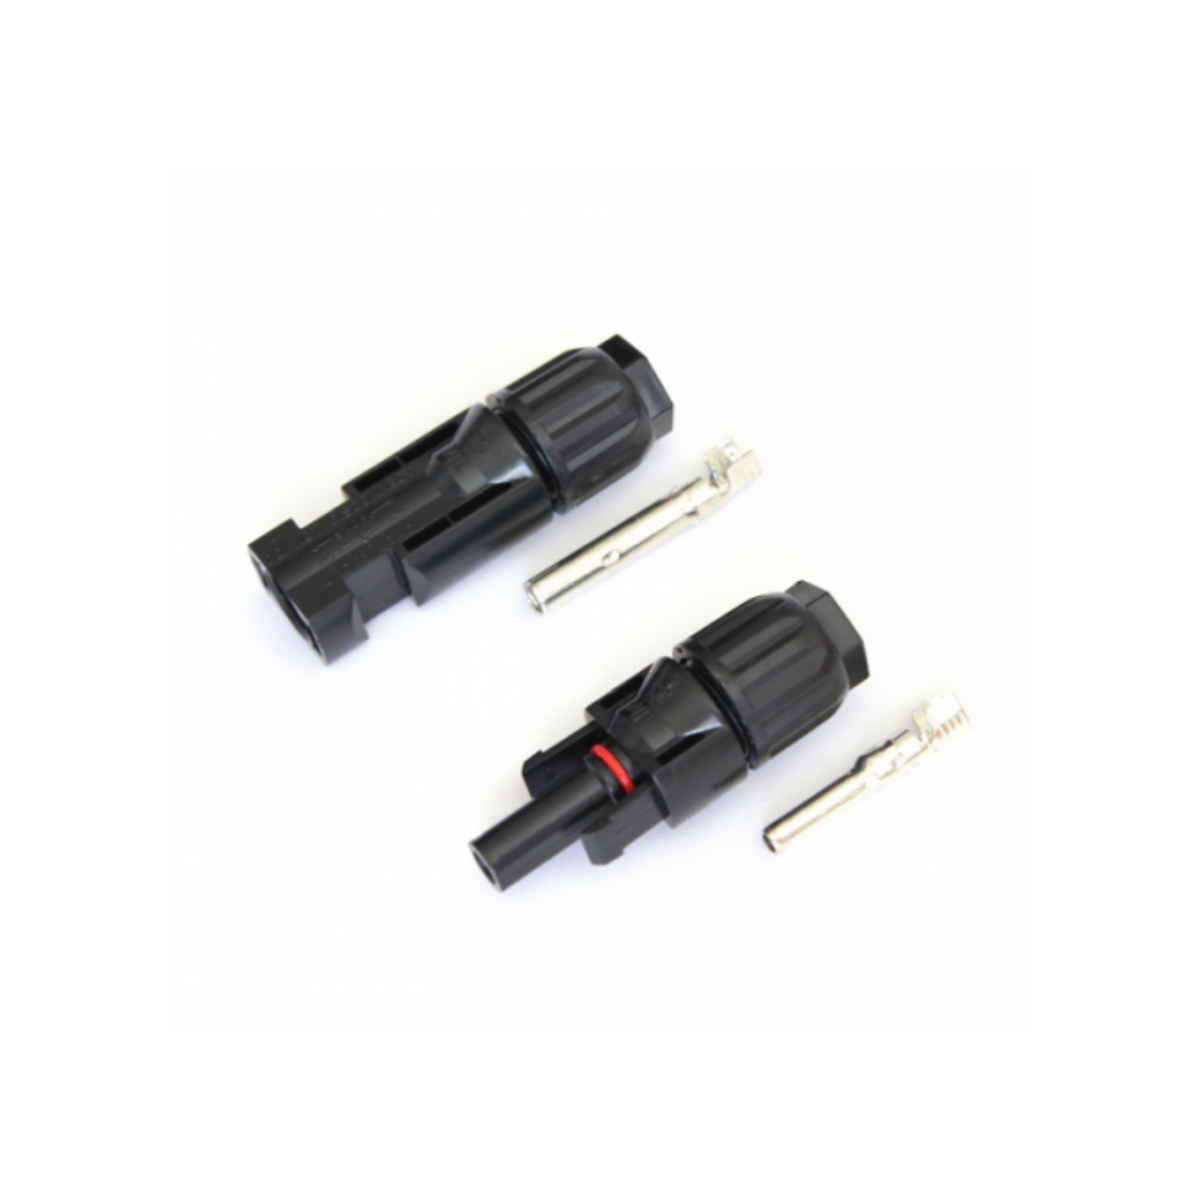 Pair of MC4 Solar Panel Connectors For 10mm2 Solar Cable